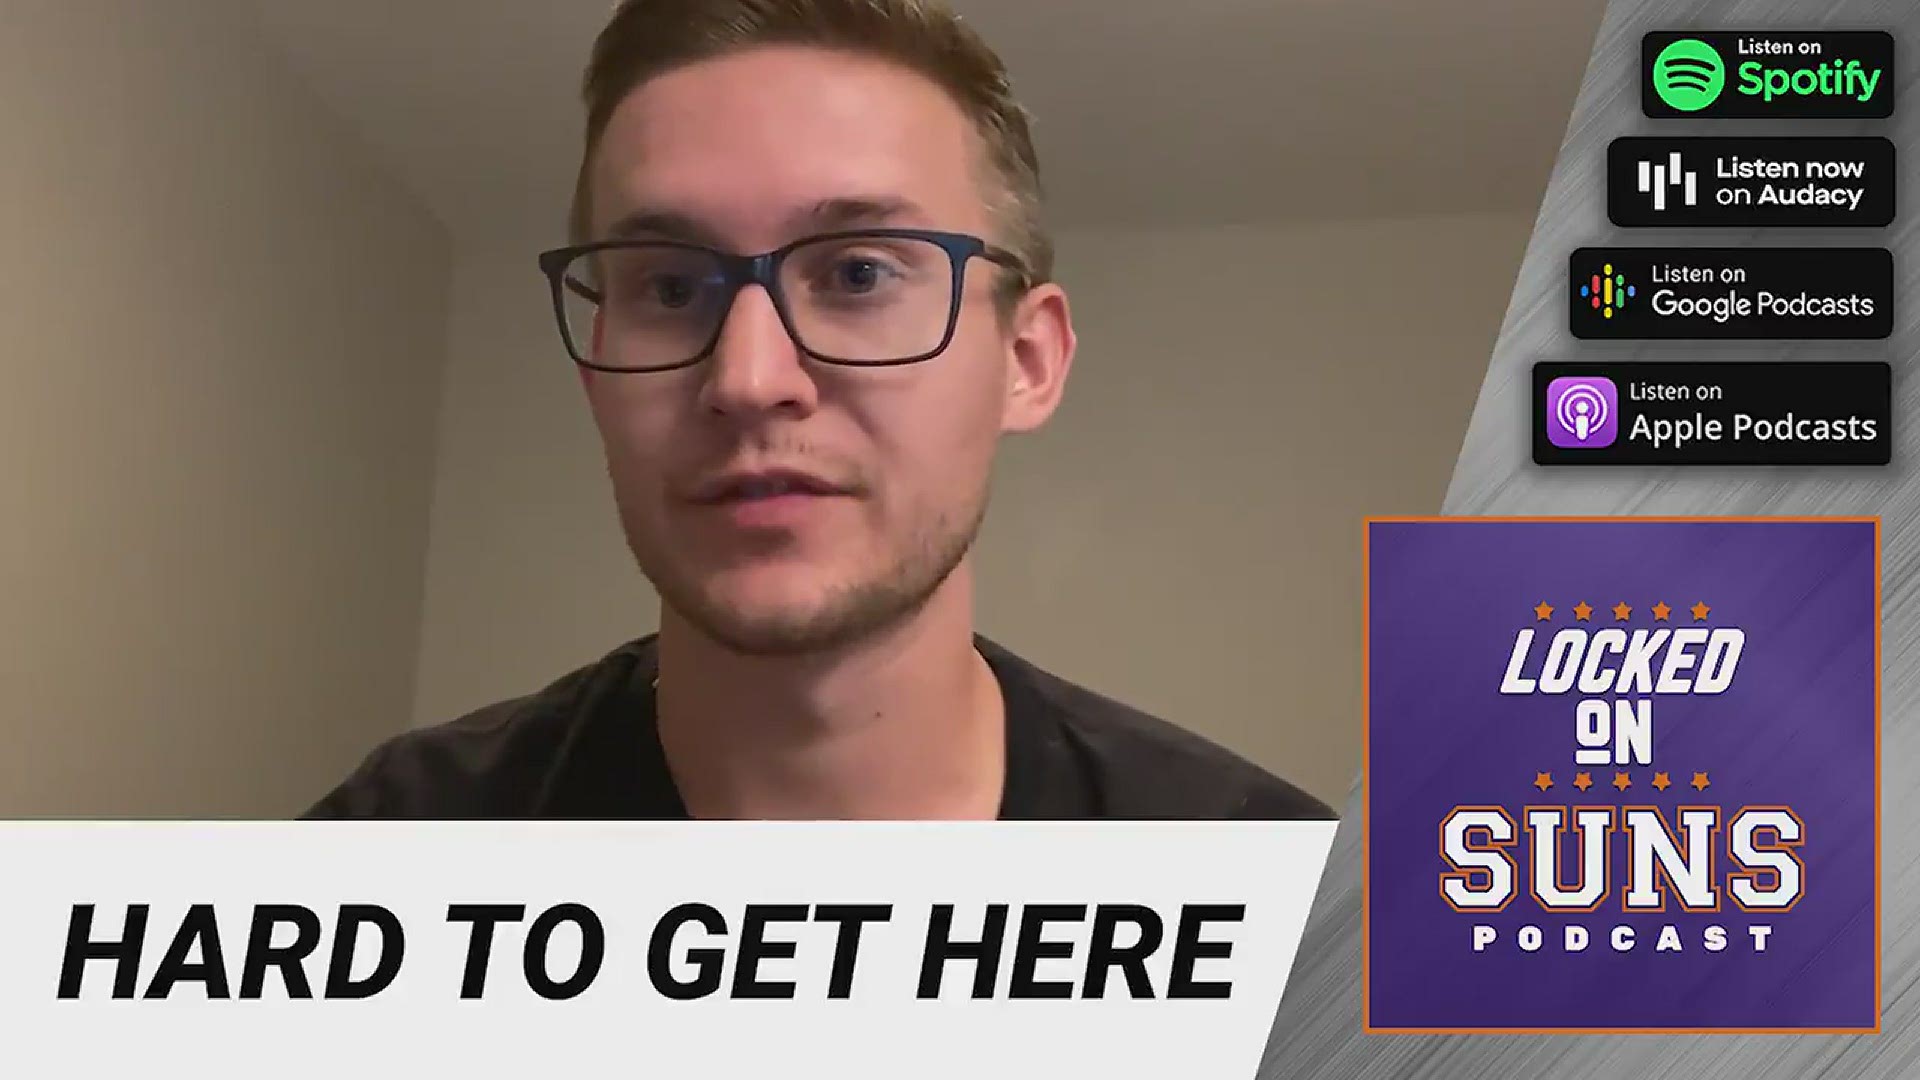 Locked On Suns host Brendon Kleen gives his closing thoughts on the 2020-21 season for the Phoenix Suns where they made the playoffs for the first time in 10 years.